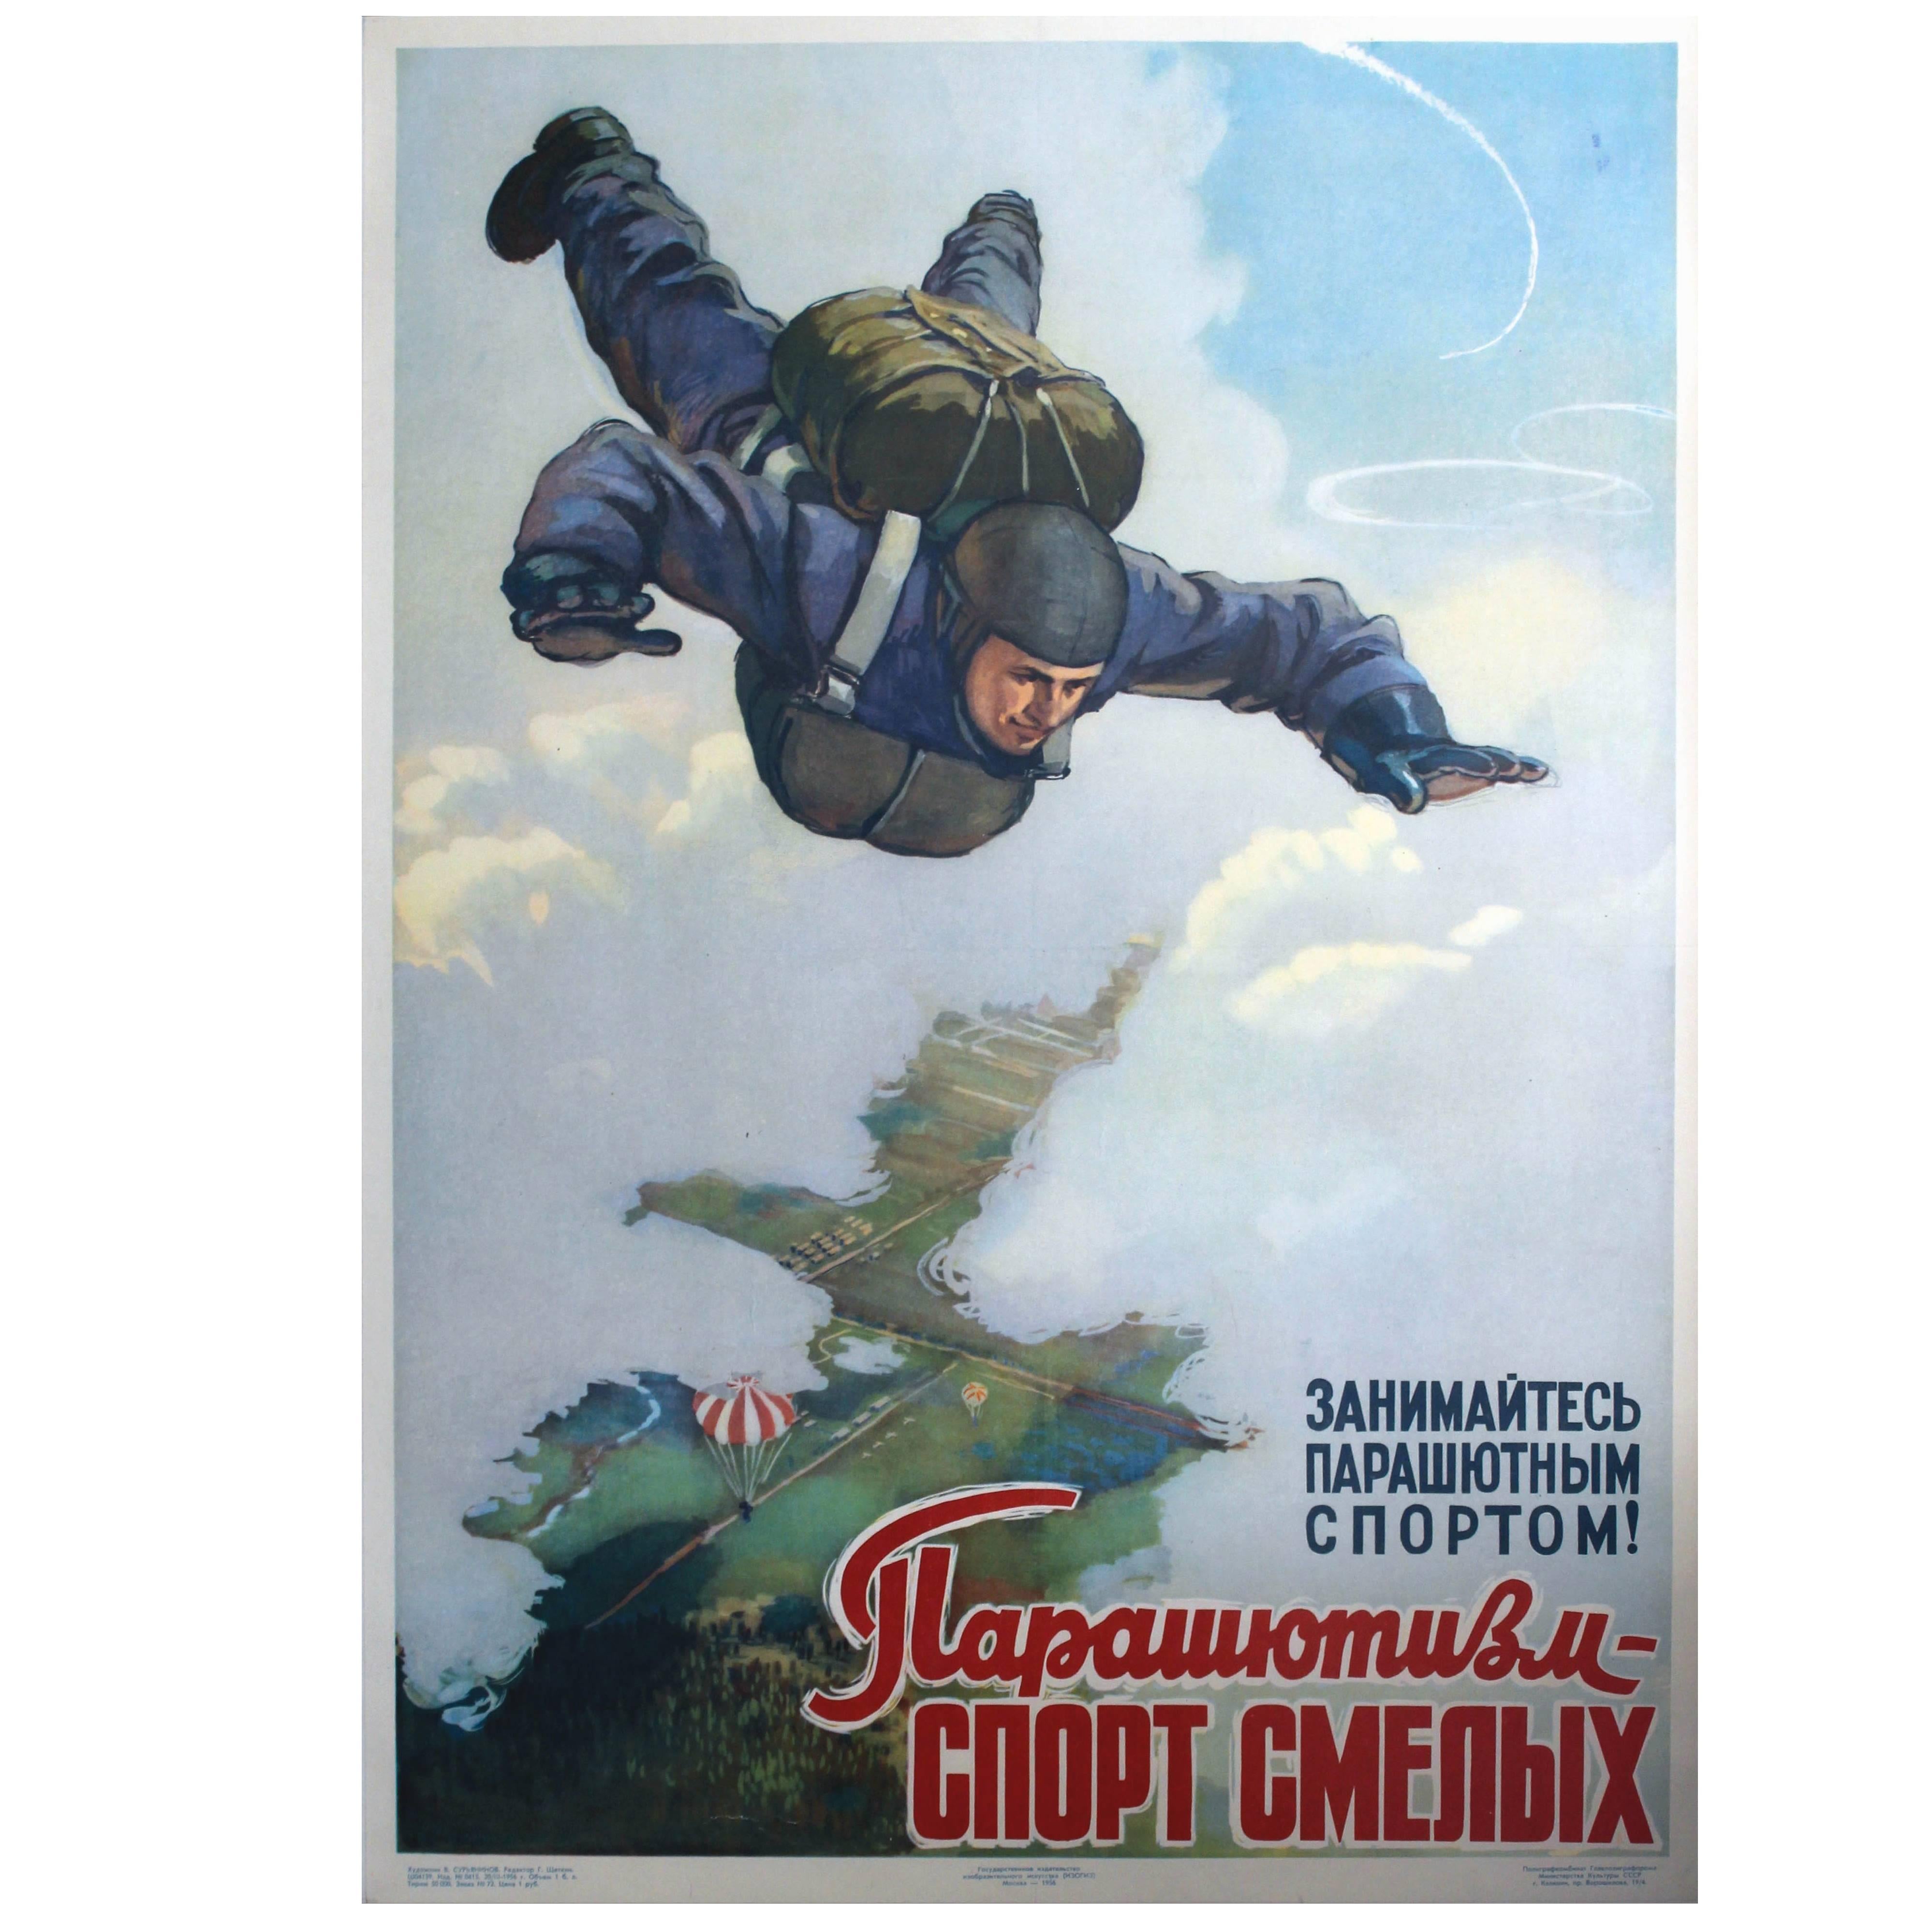 Original Vintage Soviet Poster Featuring Parachute Jumpers "Sport For The Brave"